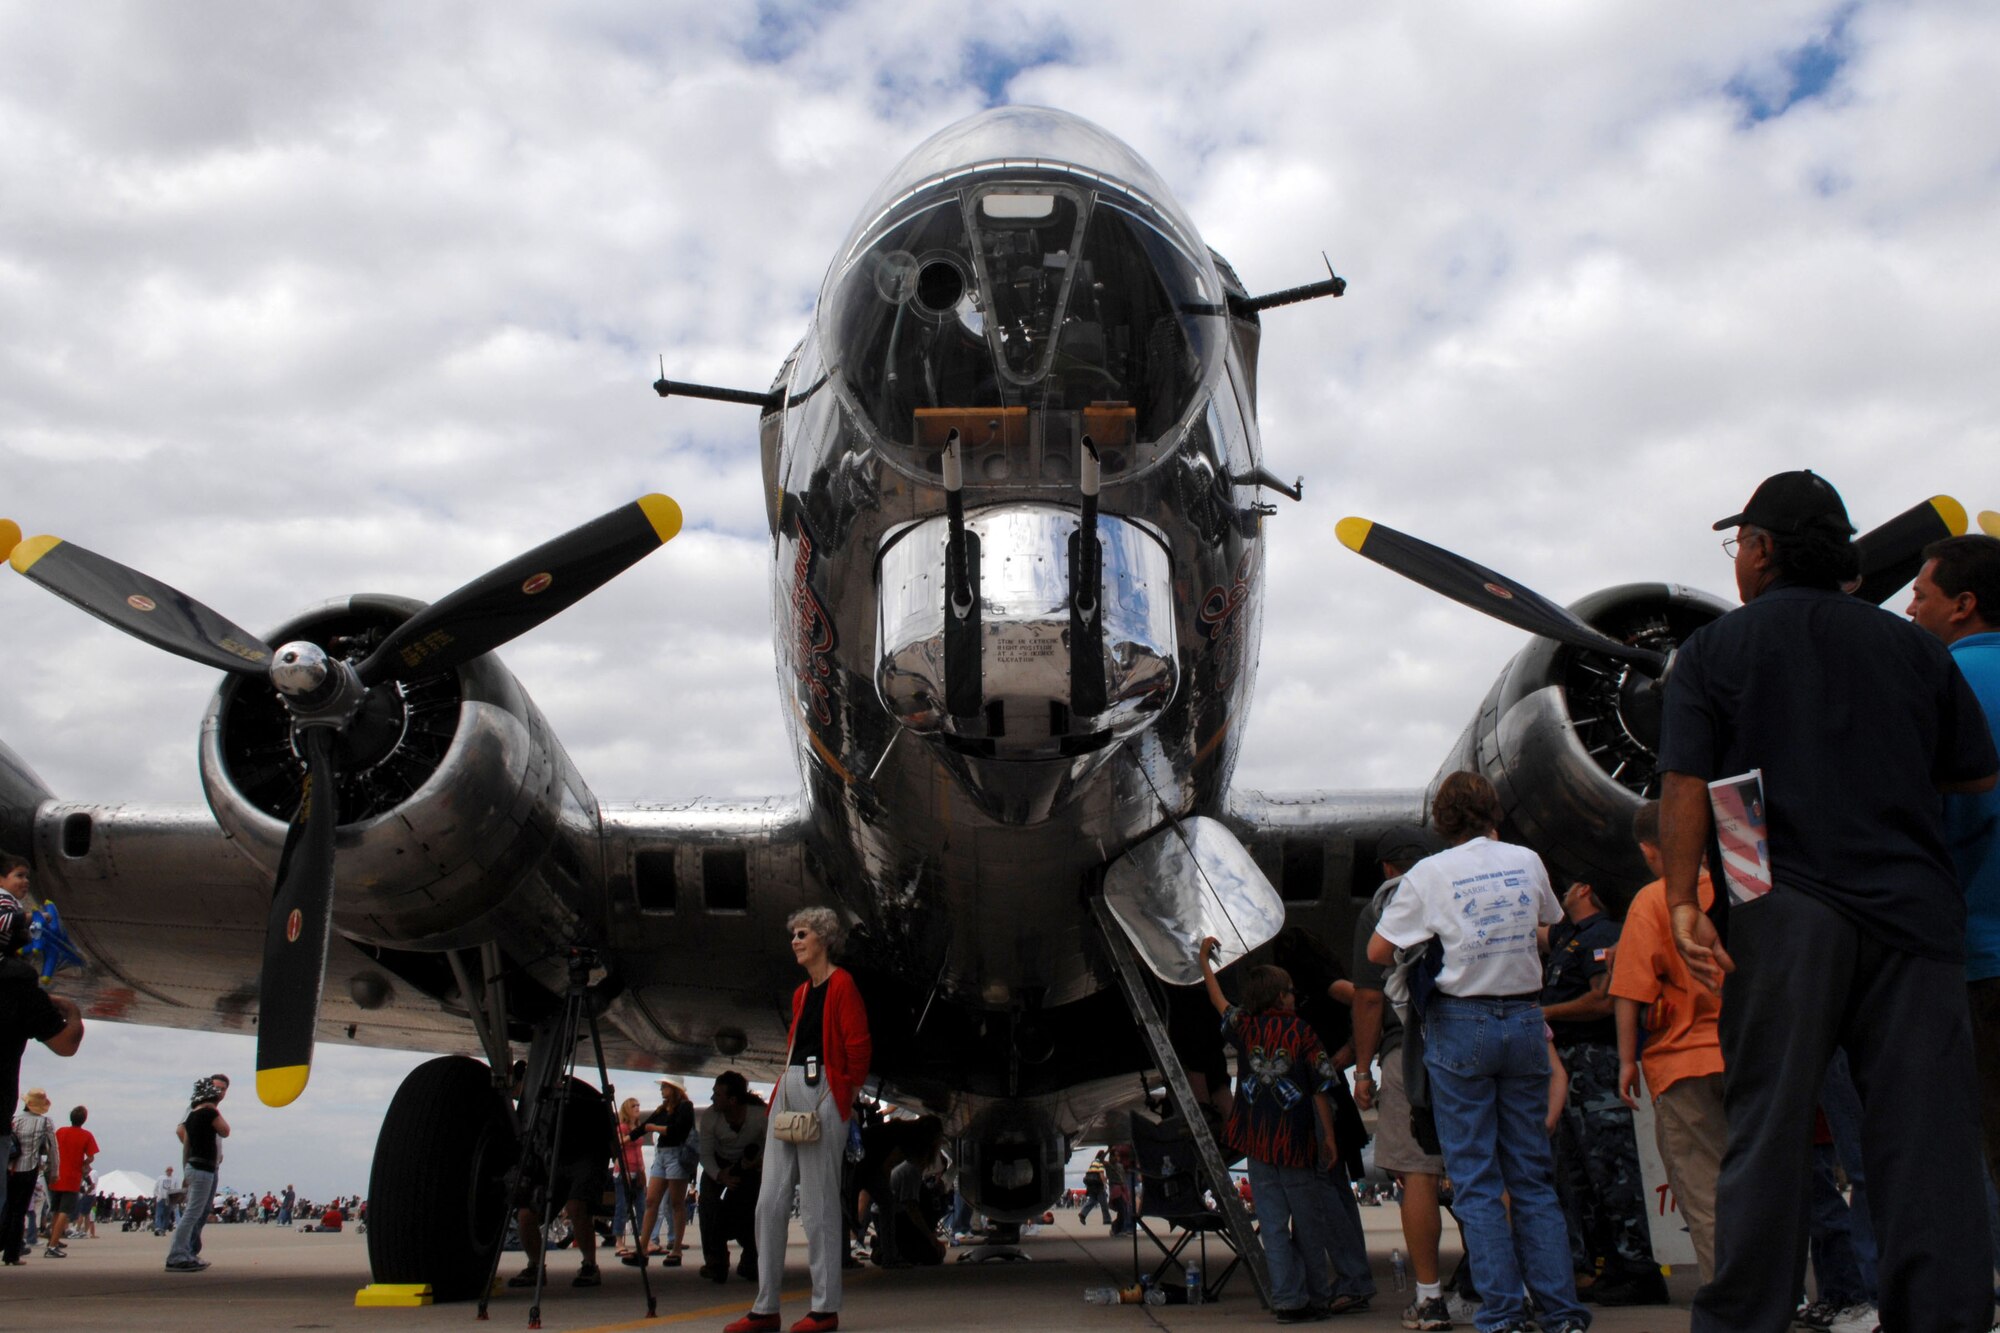 Spectators check out a 1944 B-17 during "The Show of Force 2007, From Heritage to Horizons Air Show" at Luke Air Force Base, Ariz., March 24.  The show was part of Air Force Week, a week-long event designed to highlight the amazing things the Air Force is doing around the globe and to show appreciation to the local community for its support.  (U.S. Air Force photo/Staff Sgt. Brian Ferguson)